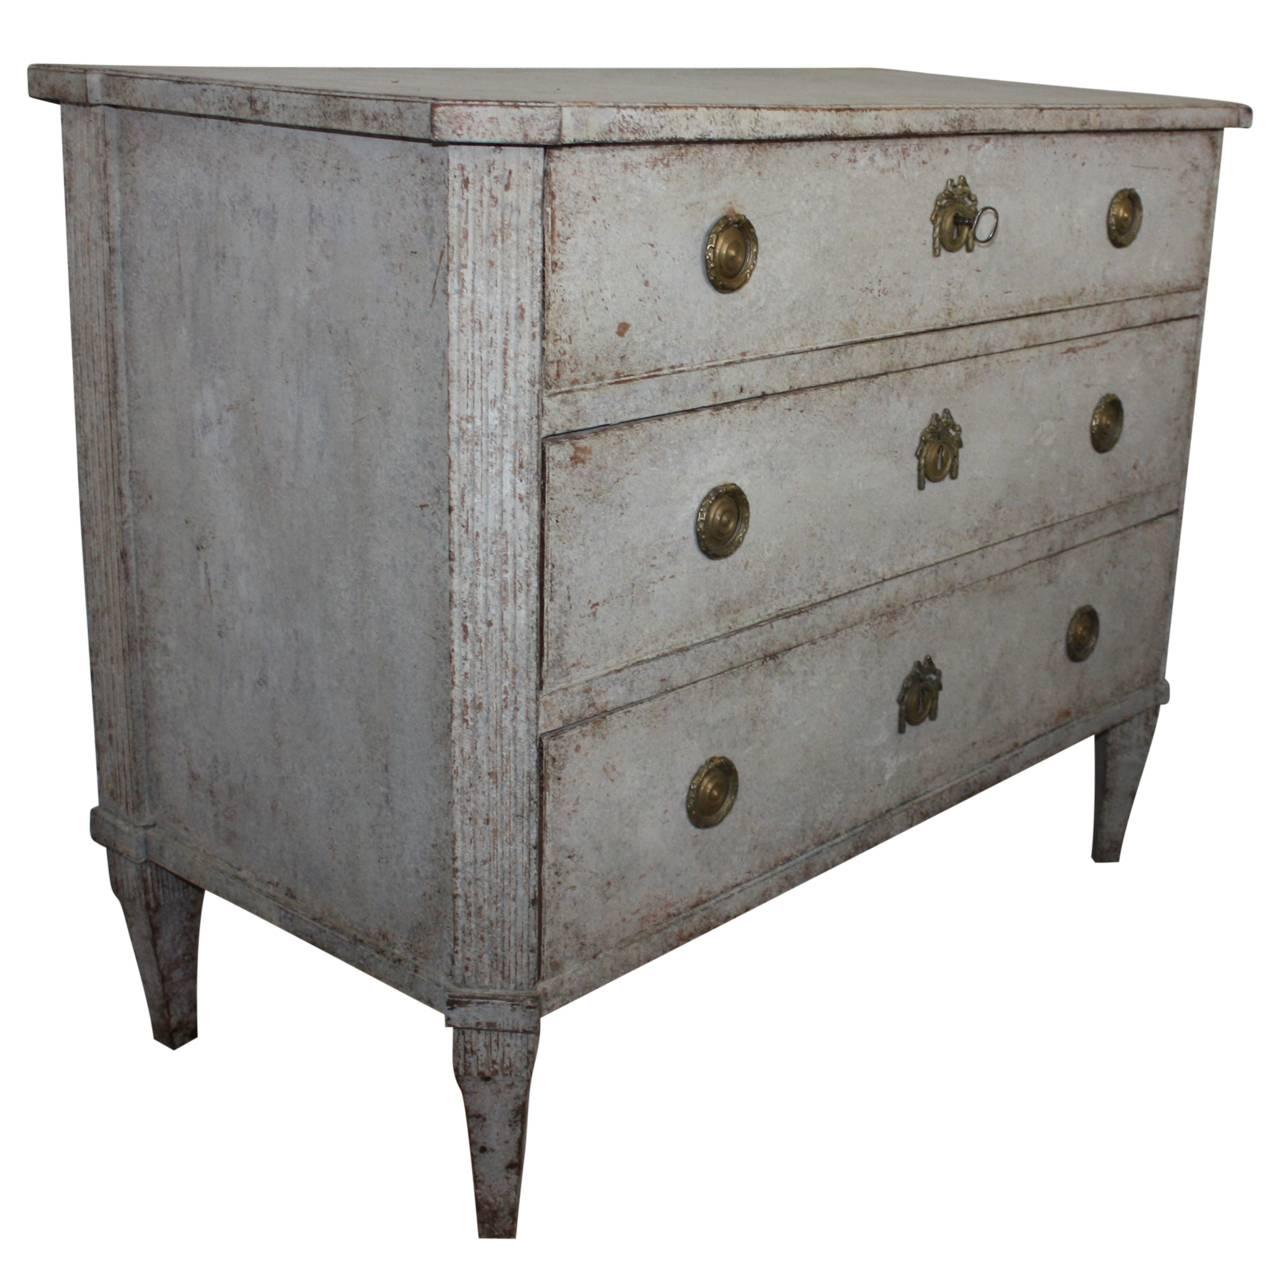 Period Gustavian-blue chest of drawers
 
$125 flat rate front door delivery includes Washington DC metro, Baltimore and Philadelphia